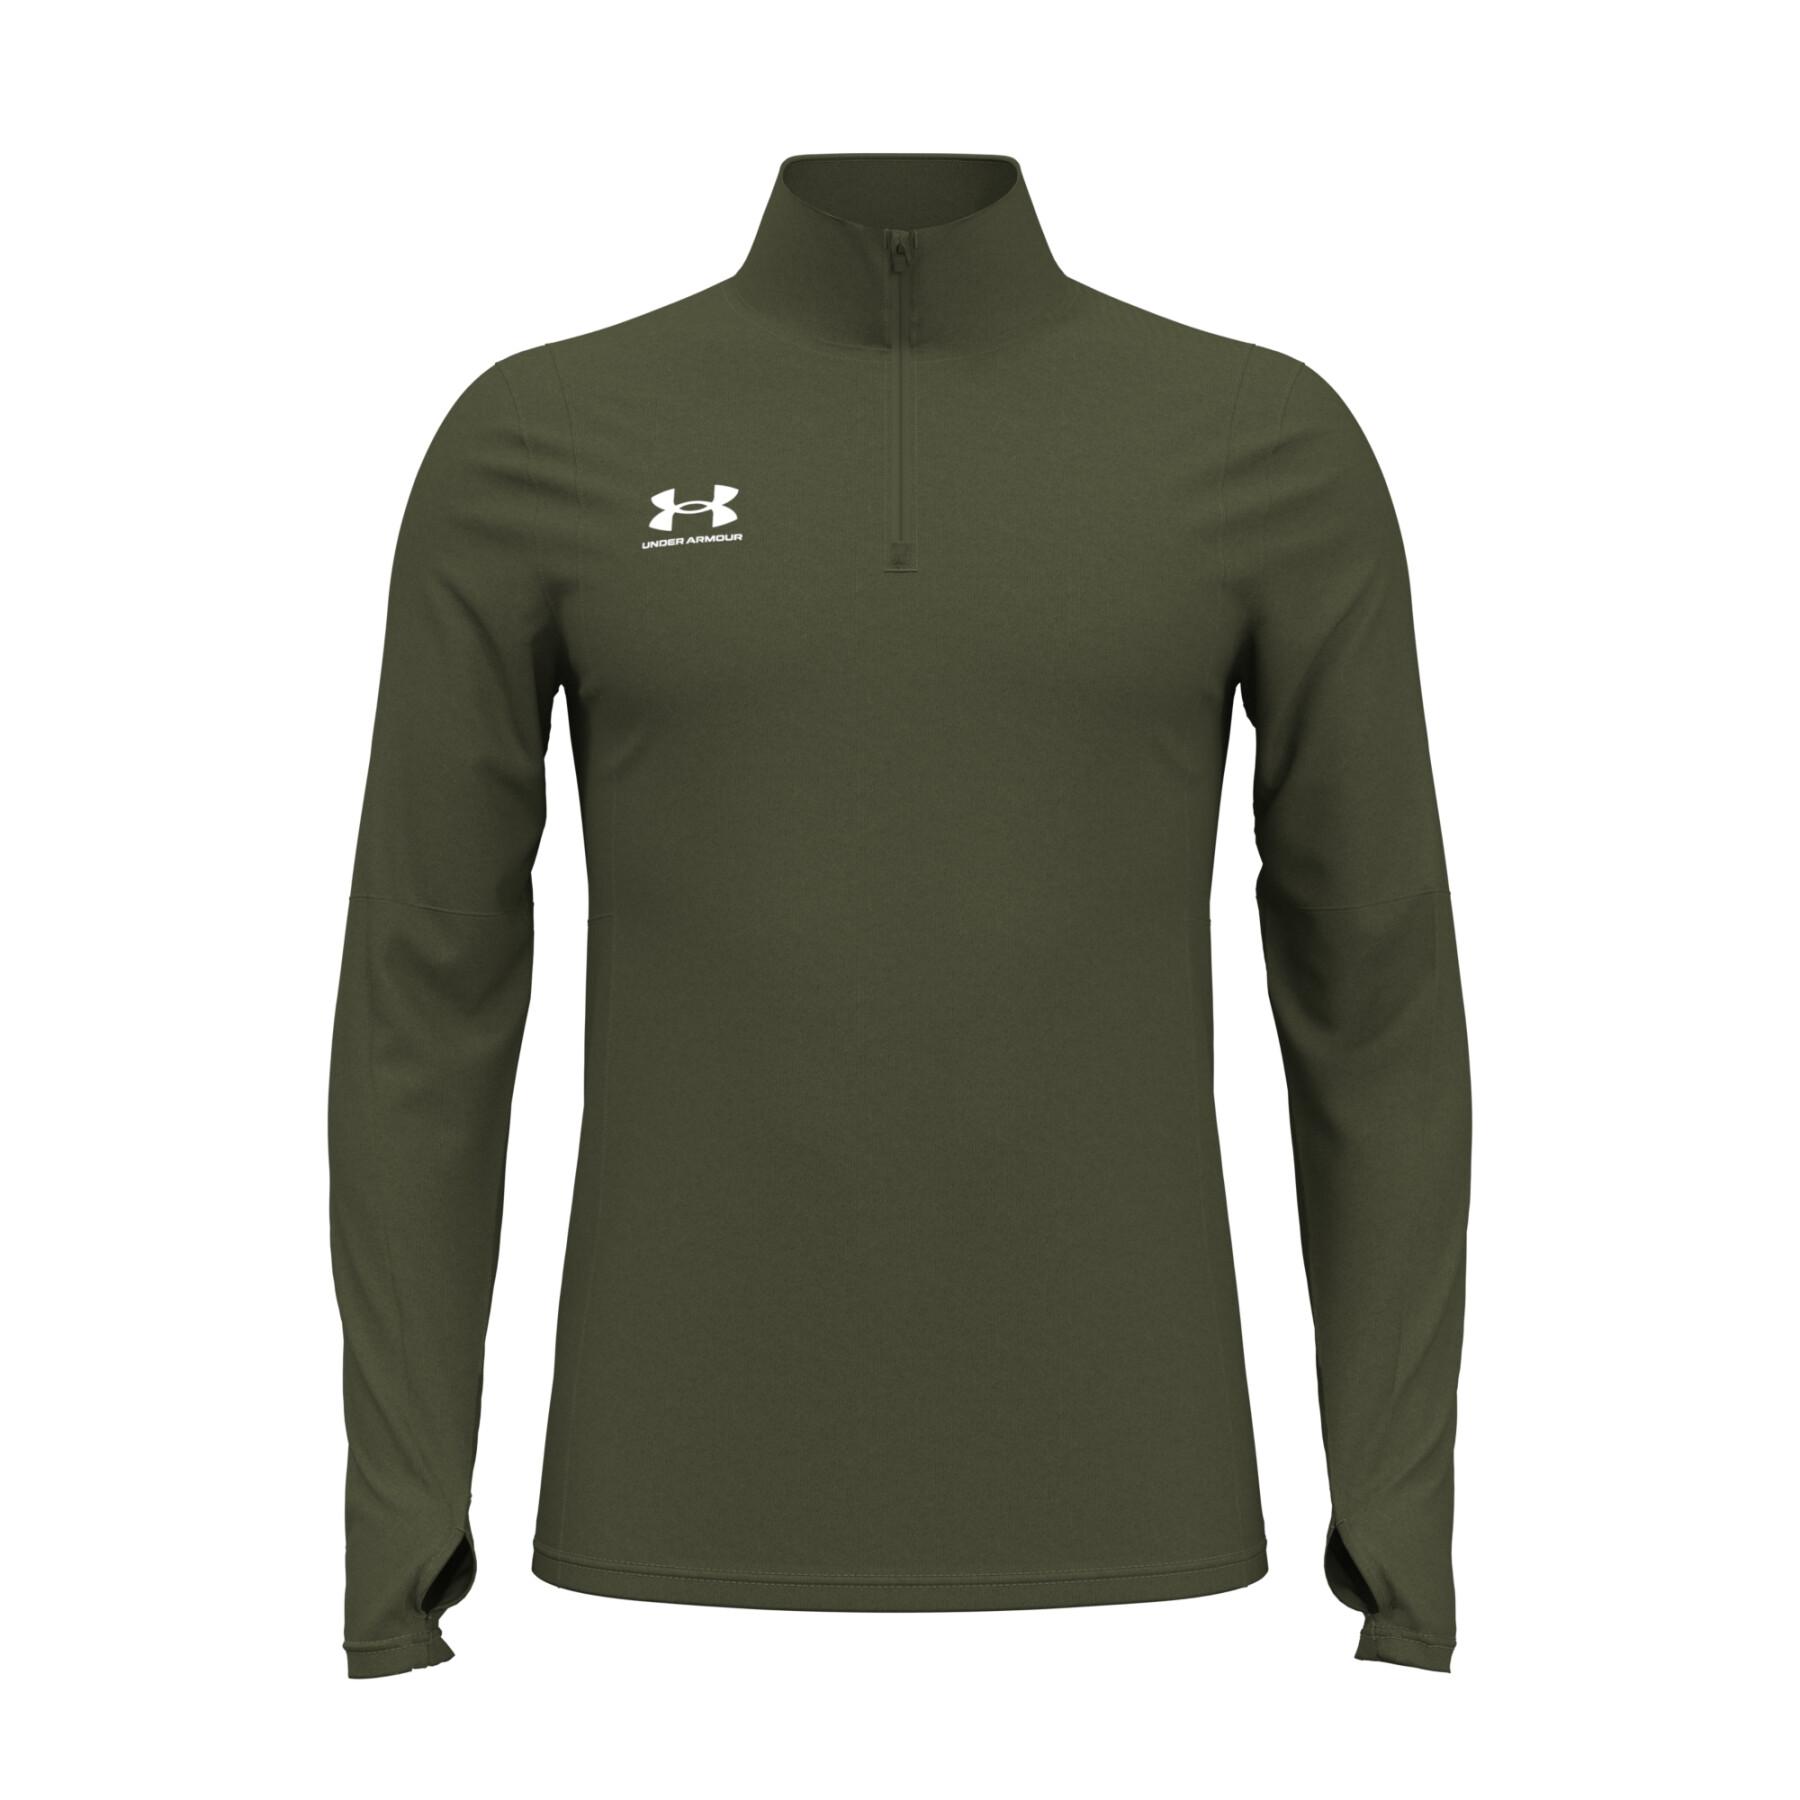 Sous maillot Under Armour Challenger